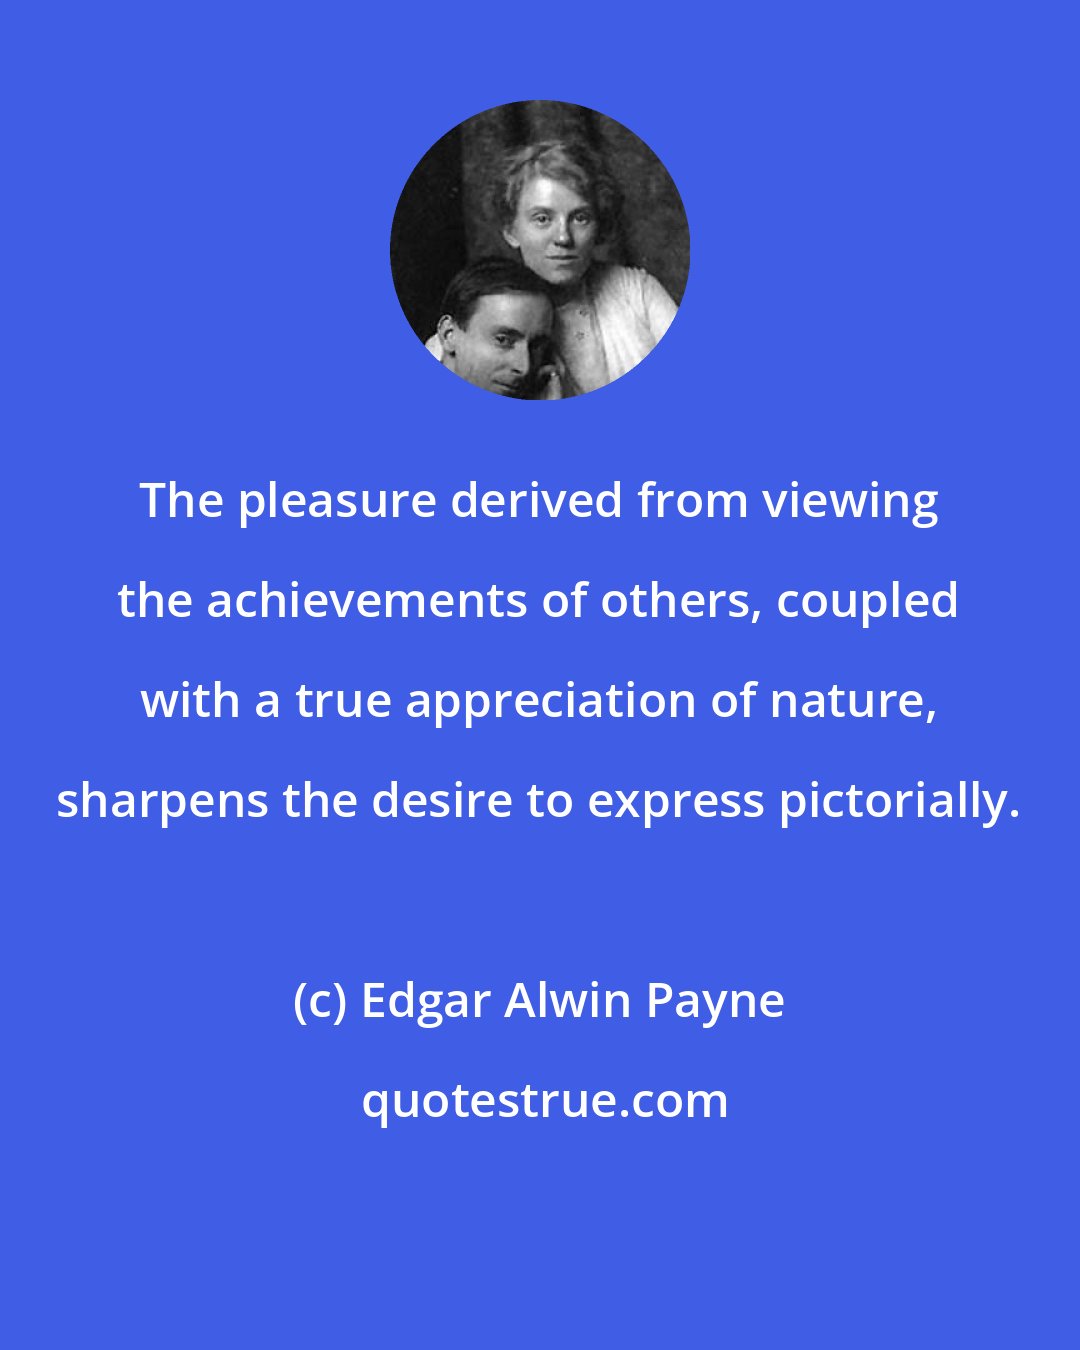 Edgar Alwin Payne: The pleasure derived from viewing the achievements of others, coupled with a true appreciation of nature, sharpens the desire to express pictorially.